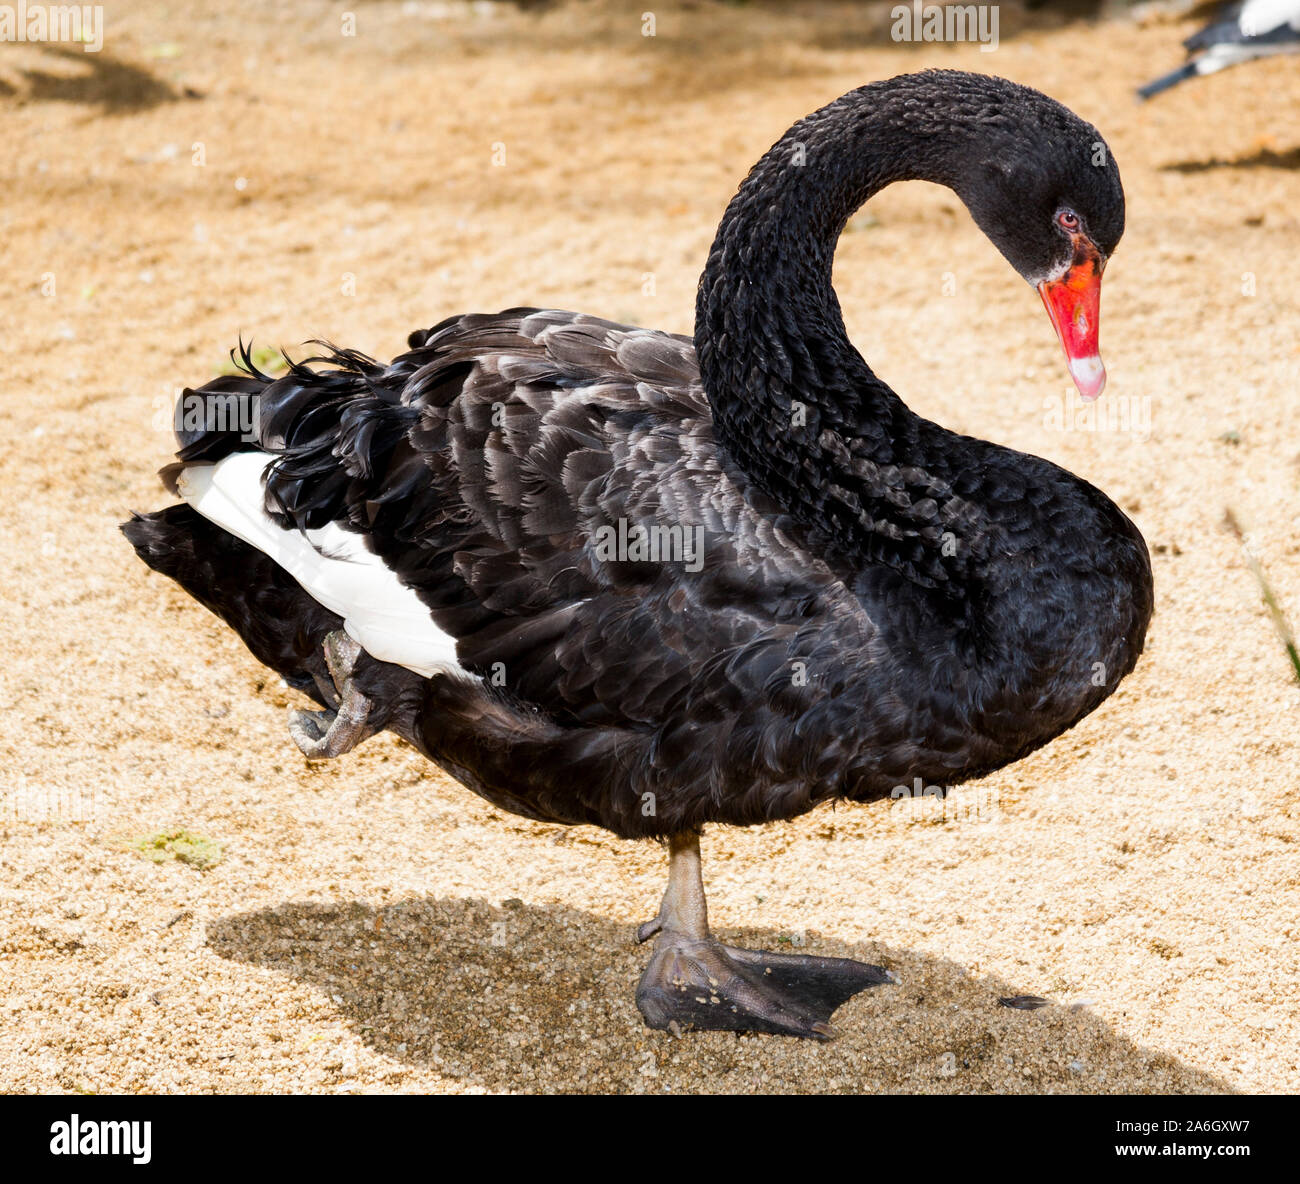 The black swan is a large waterbird, a species of swan which breeds mainly in the southeast and southwest regions of Australia. Within Australia they Stock Photo